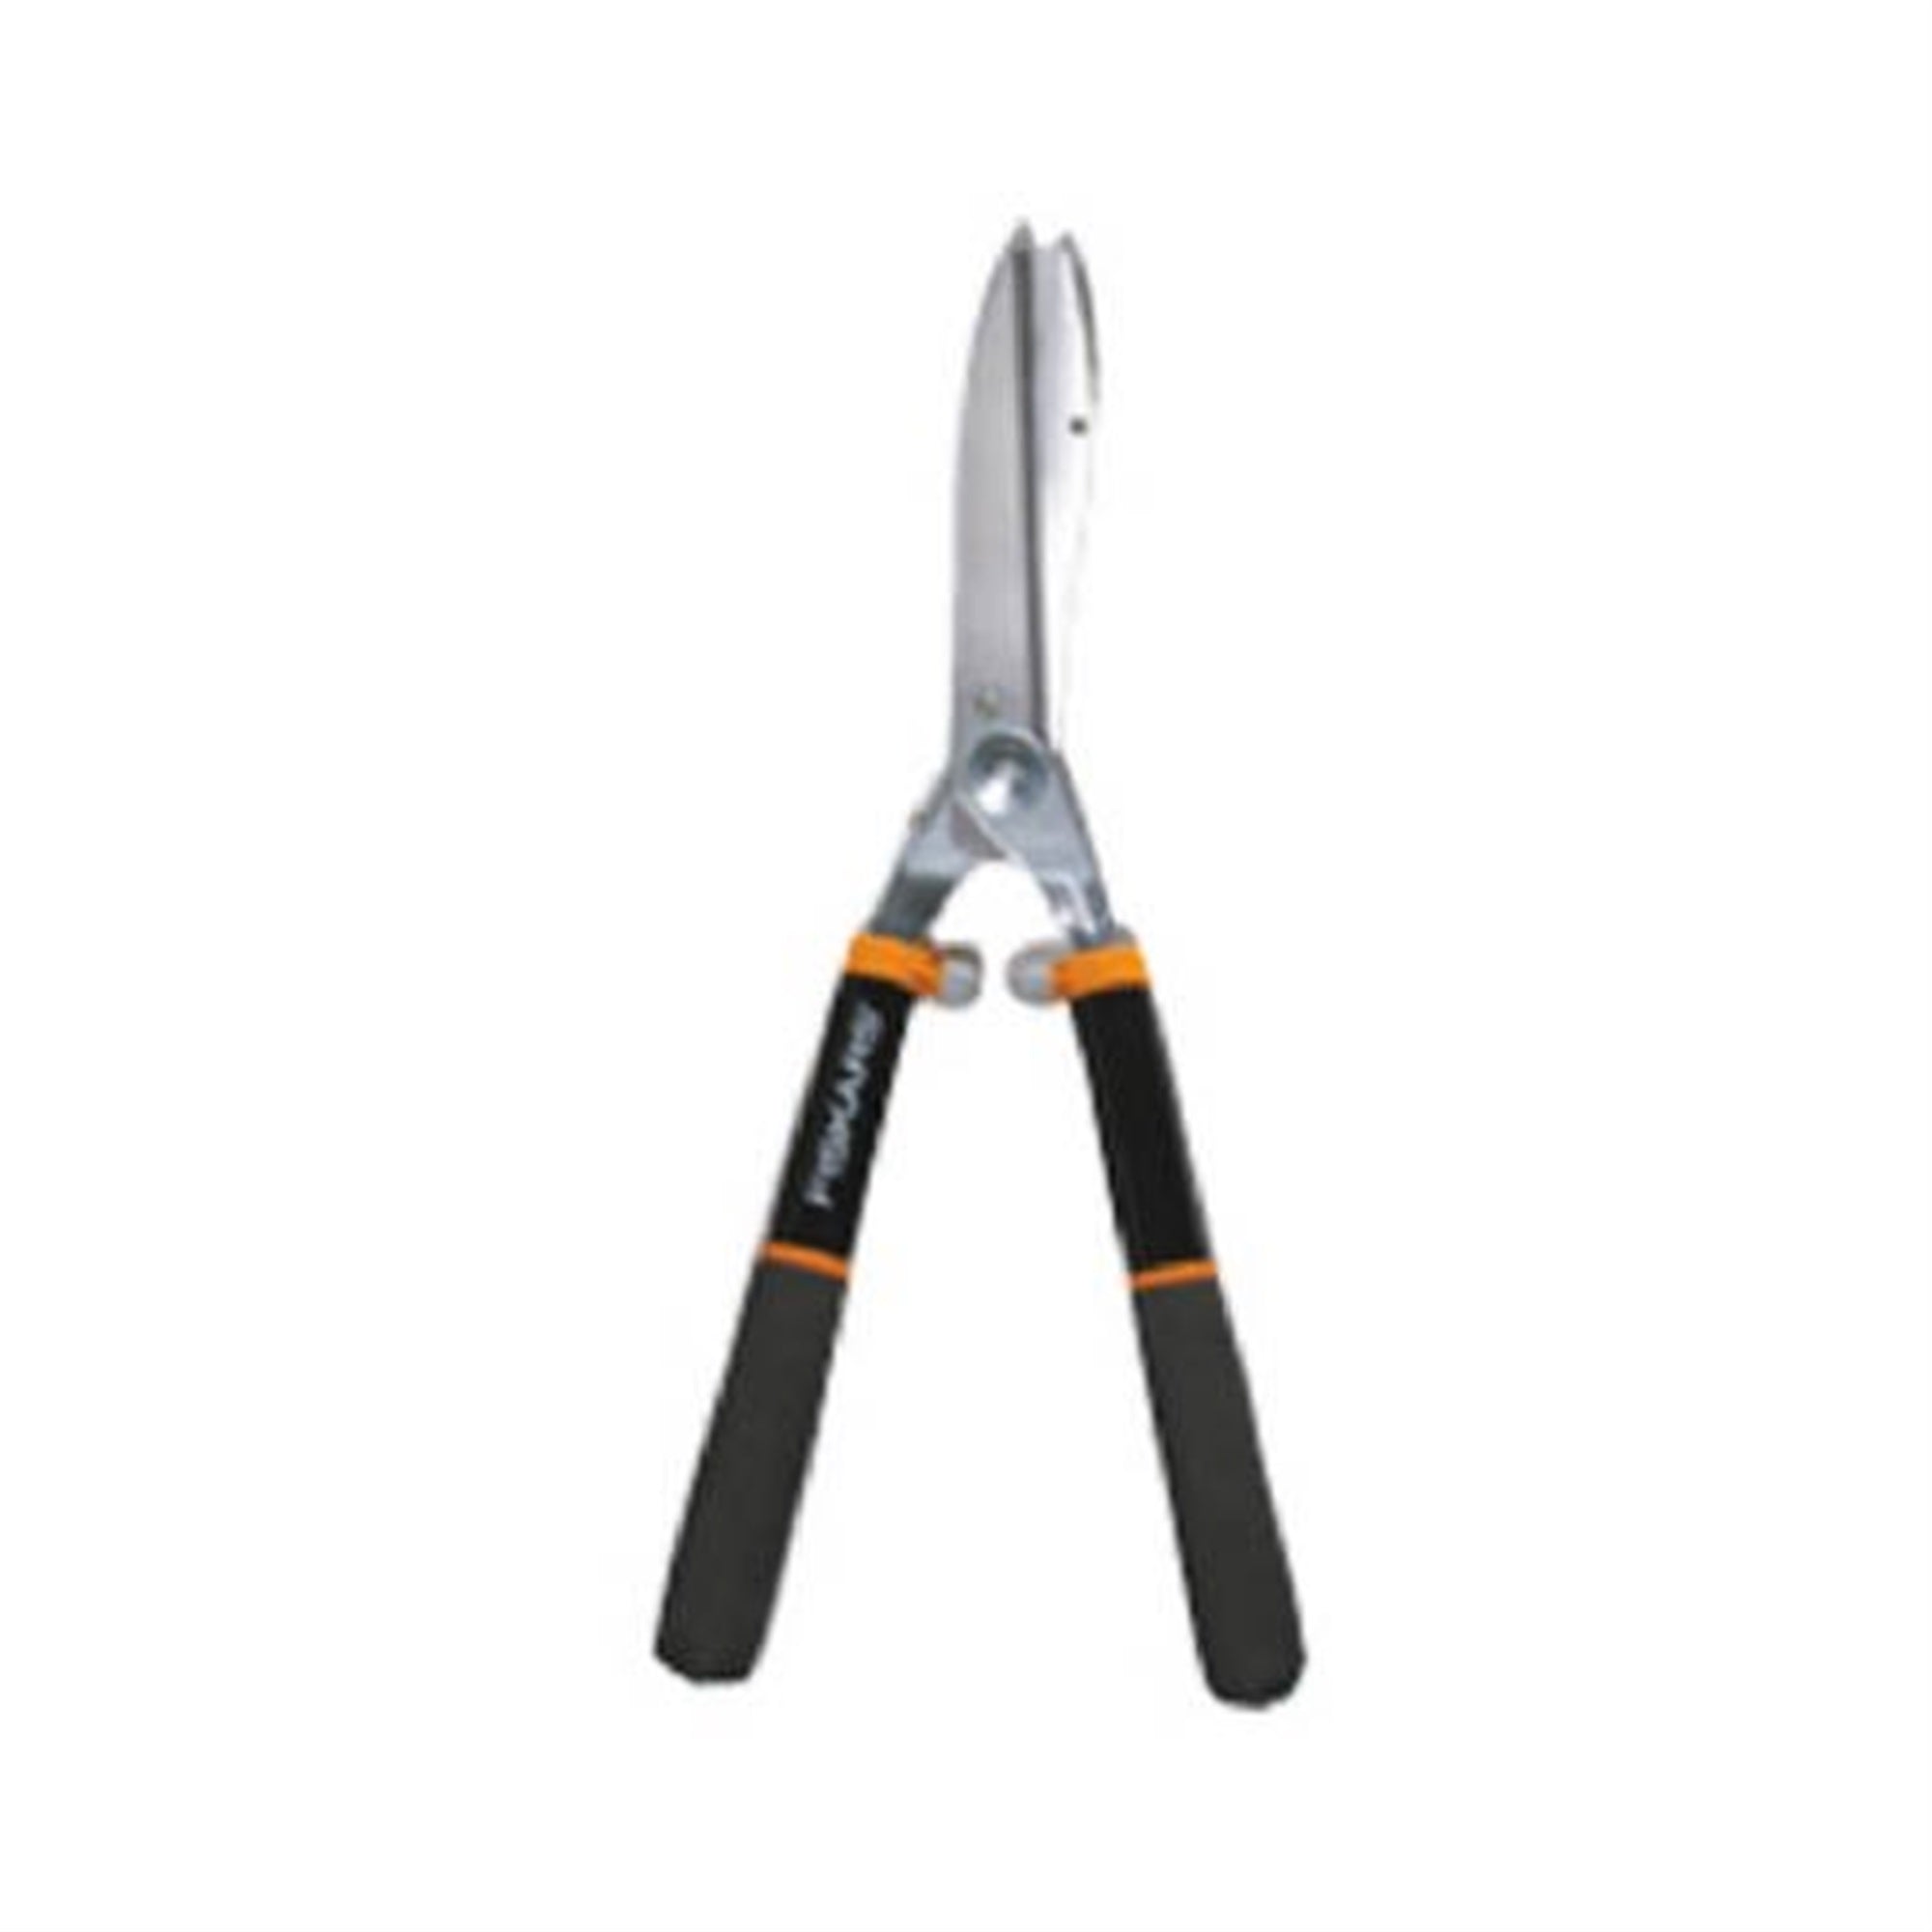 Fiskars 9191 Power Lever 8-Inch Hedge Shears With Soft Grip Handle